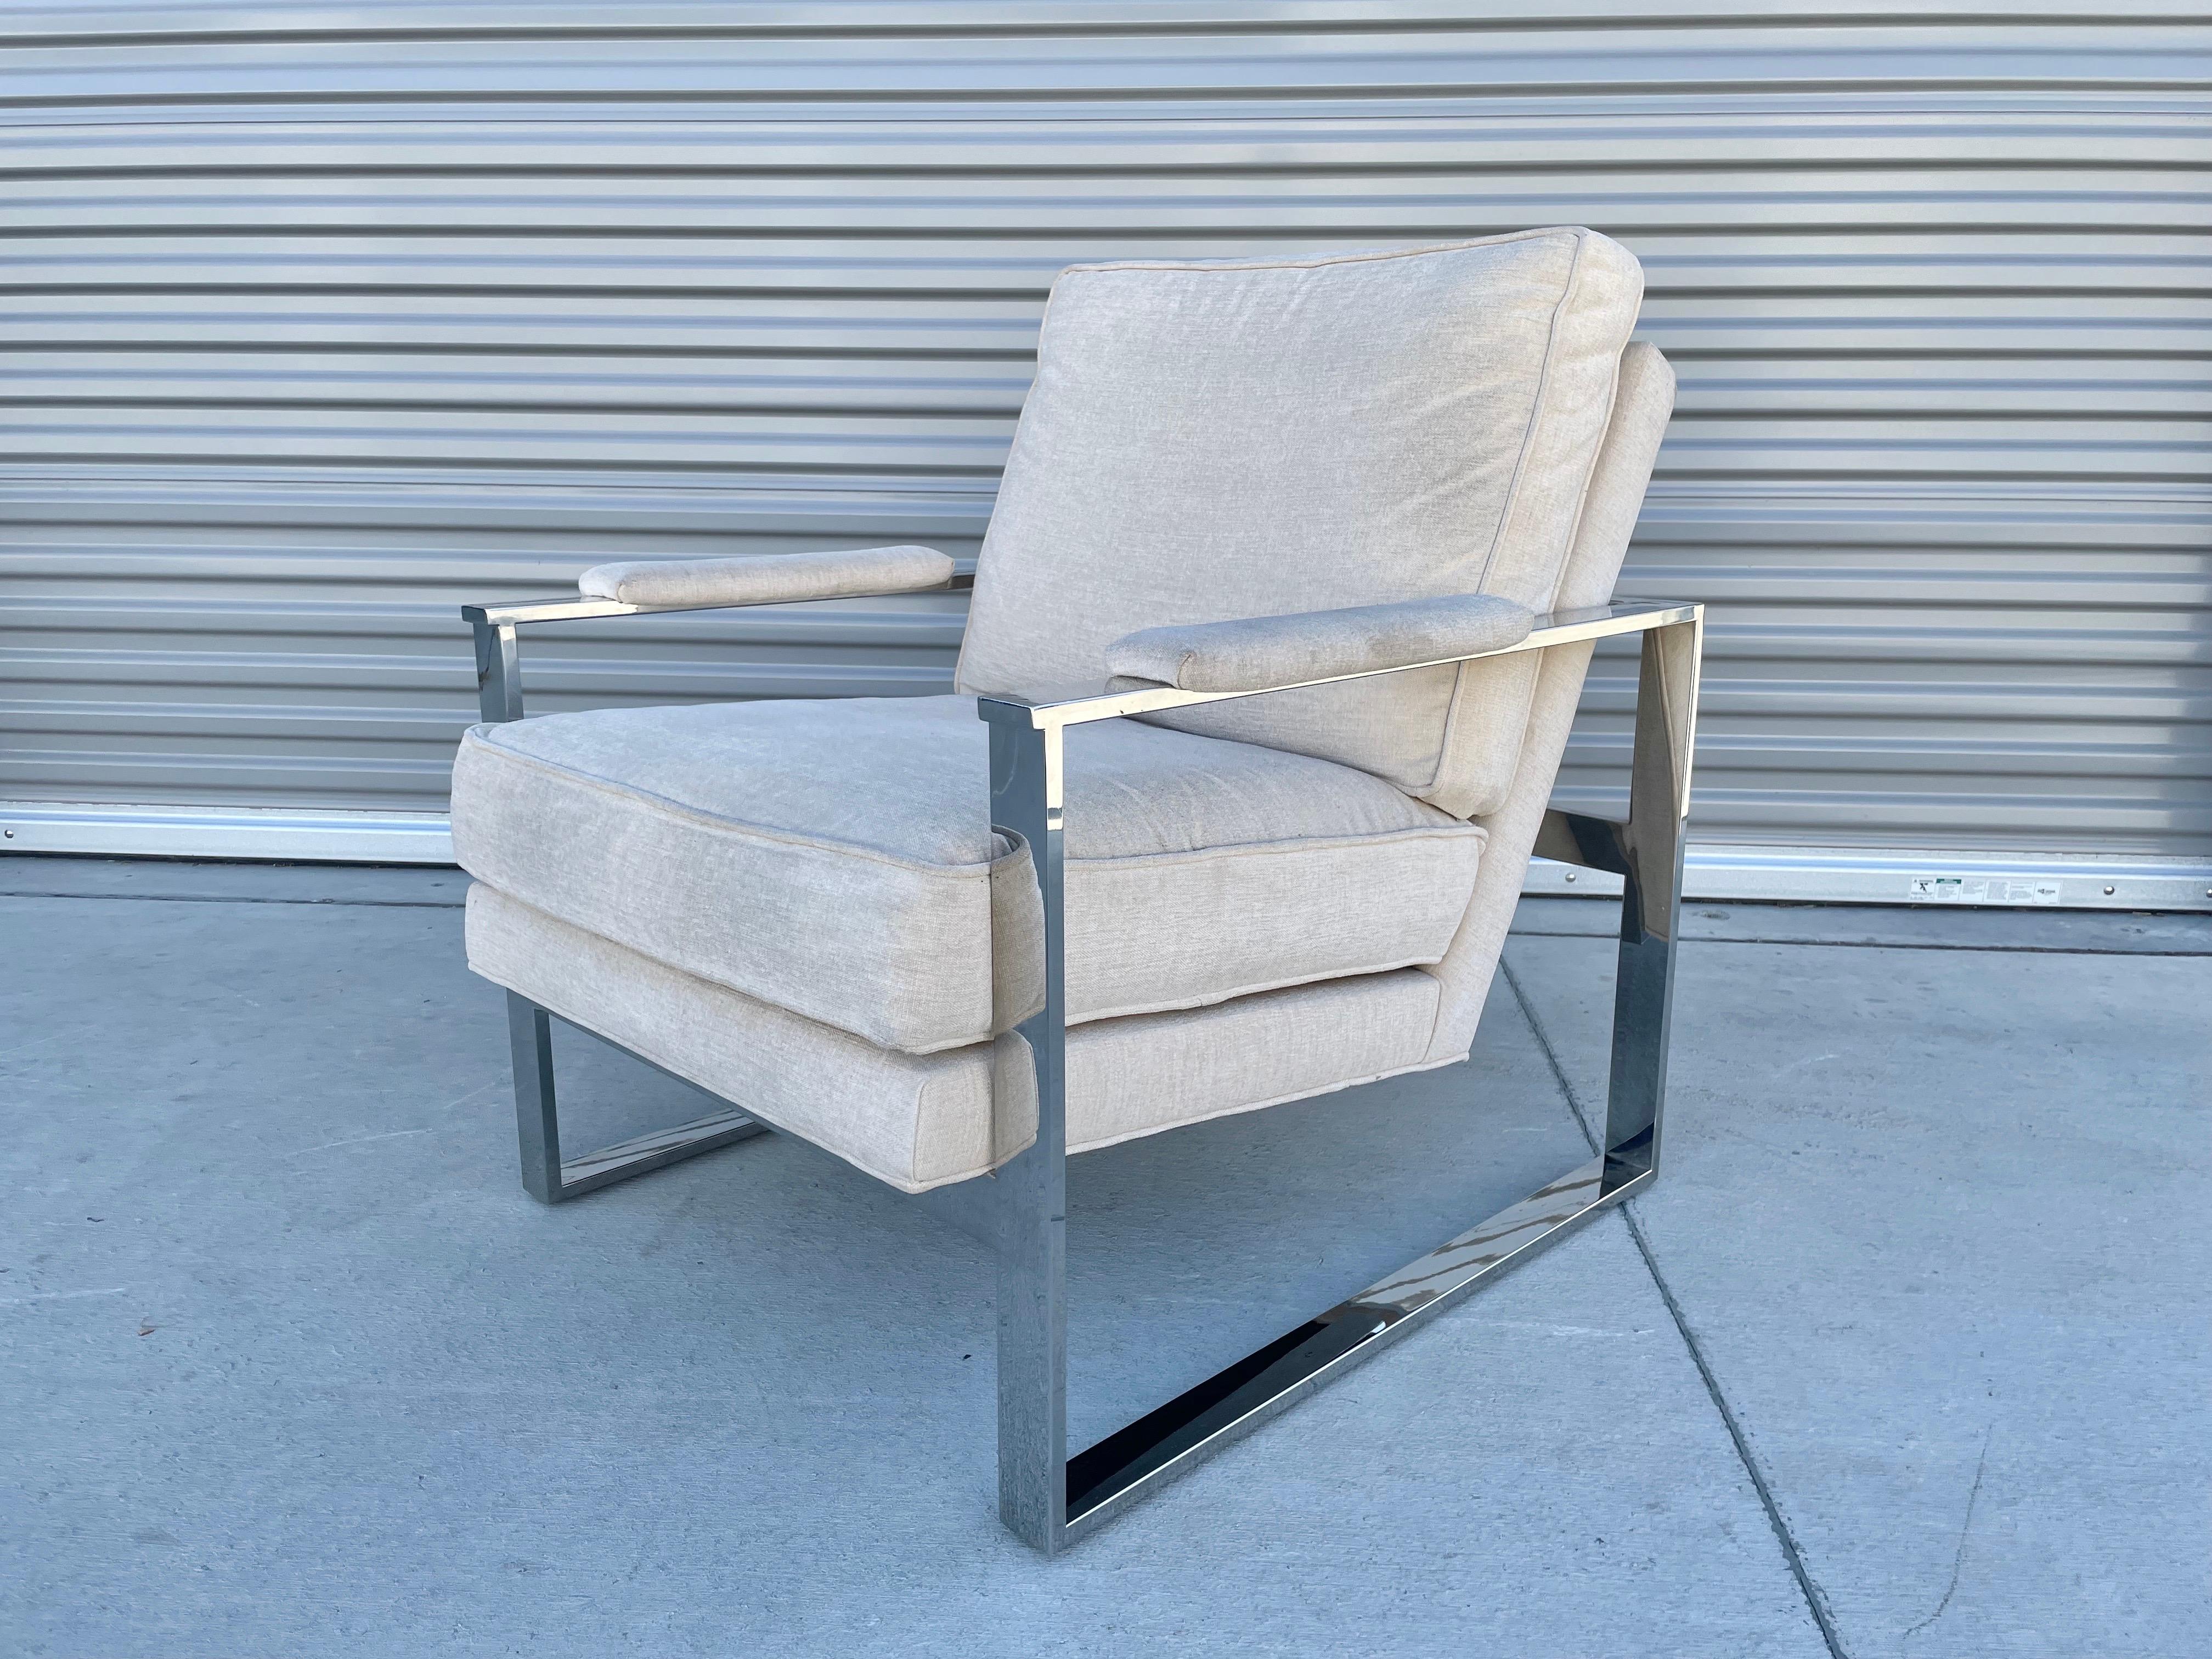 Late 20th Century Mid-Century Modern Chrome Lounge Chairs Attributed to Milo Baughman For Sale